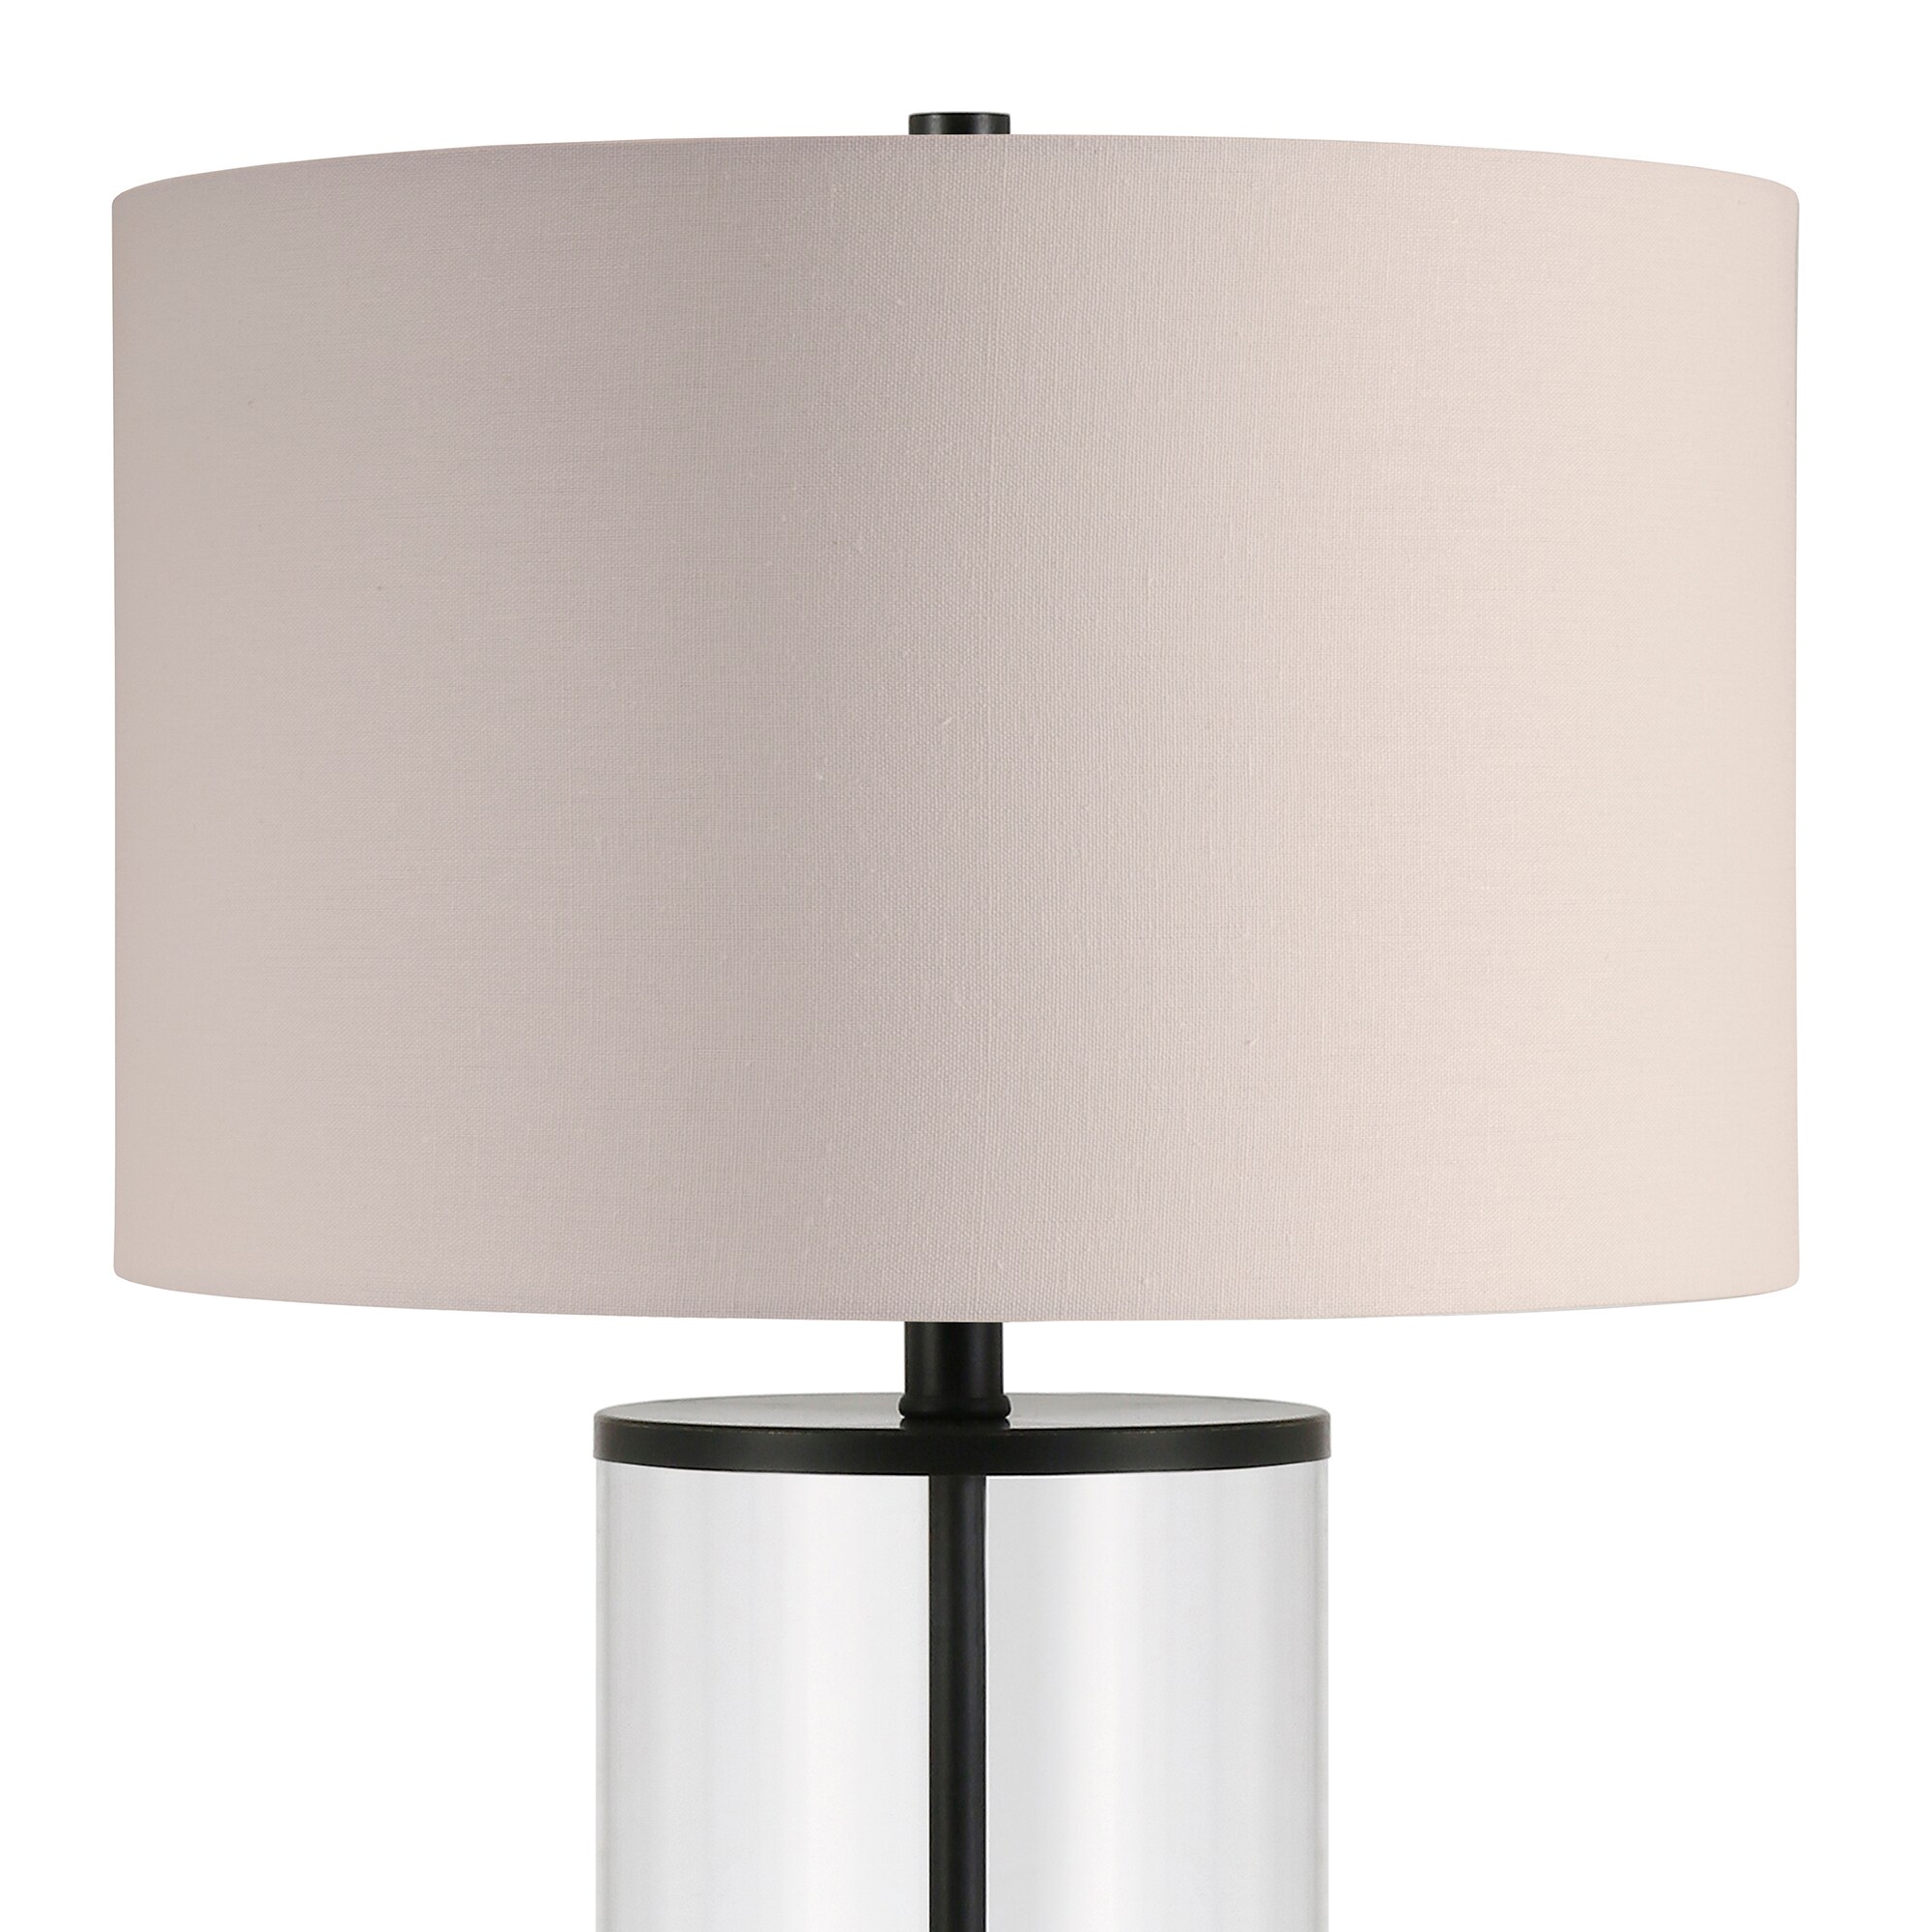 Fabric Shade In The Table Lamps, Bronze Glass Cylinder Table Lamp Base